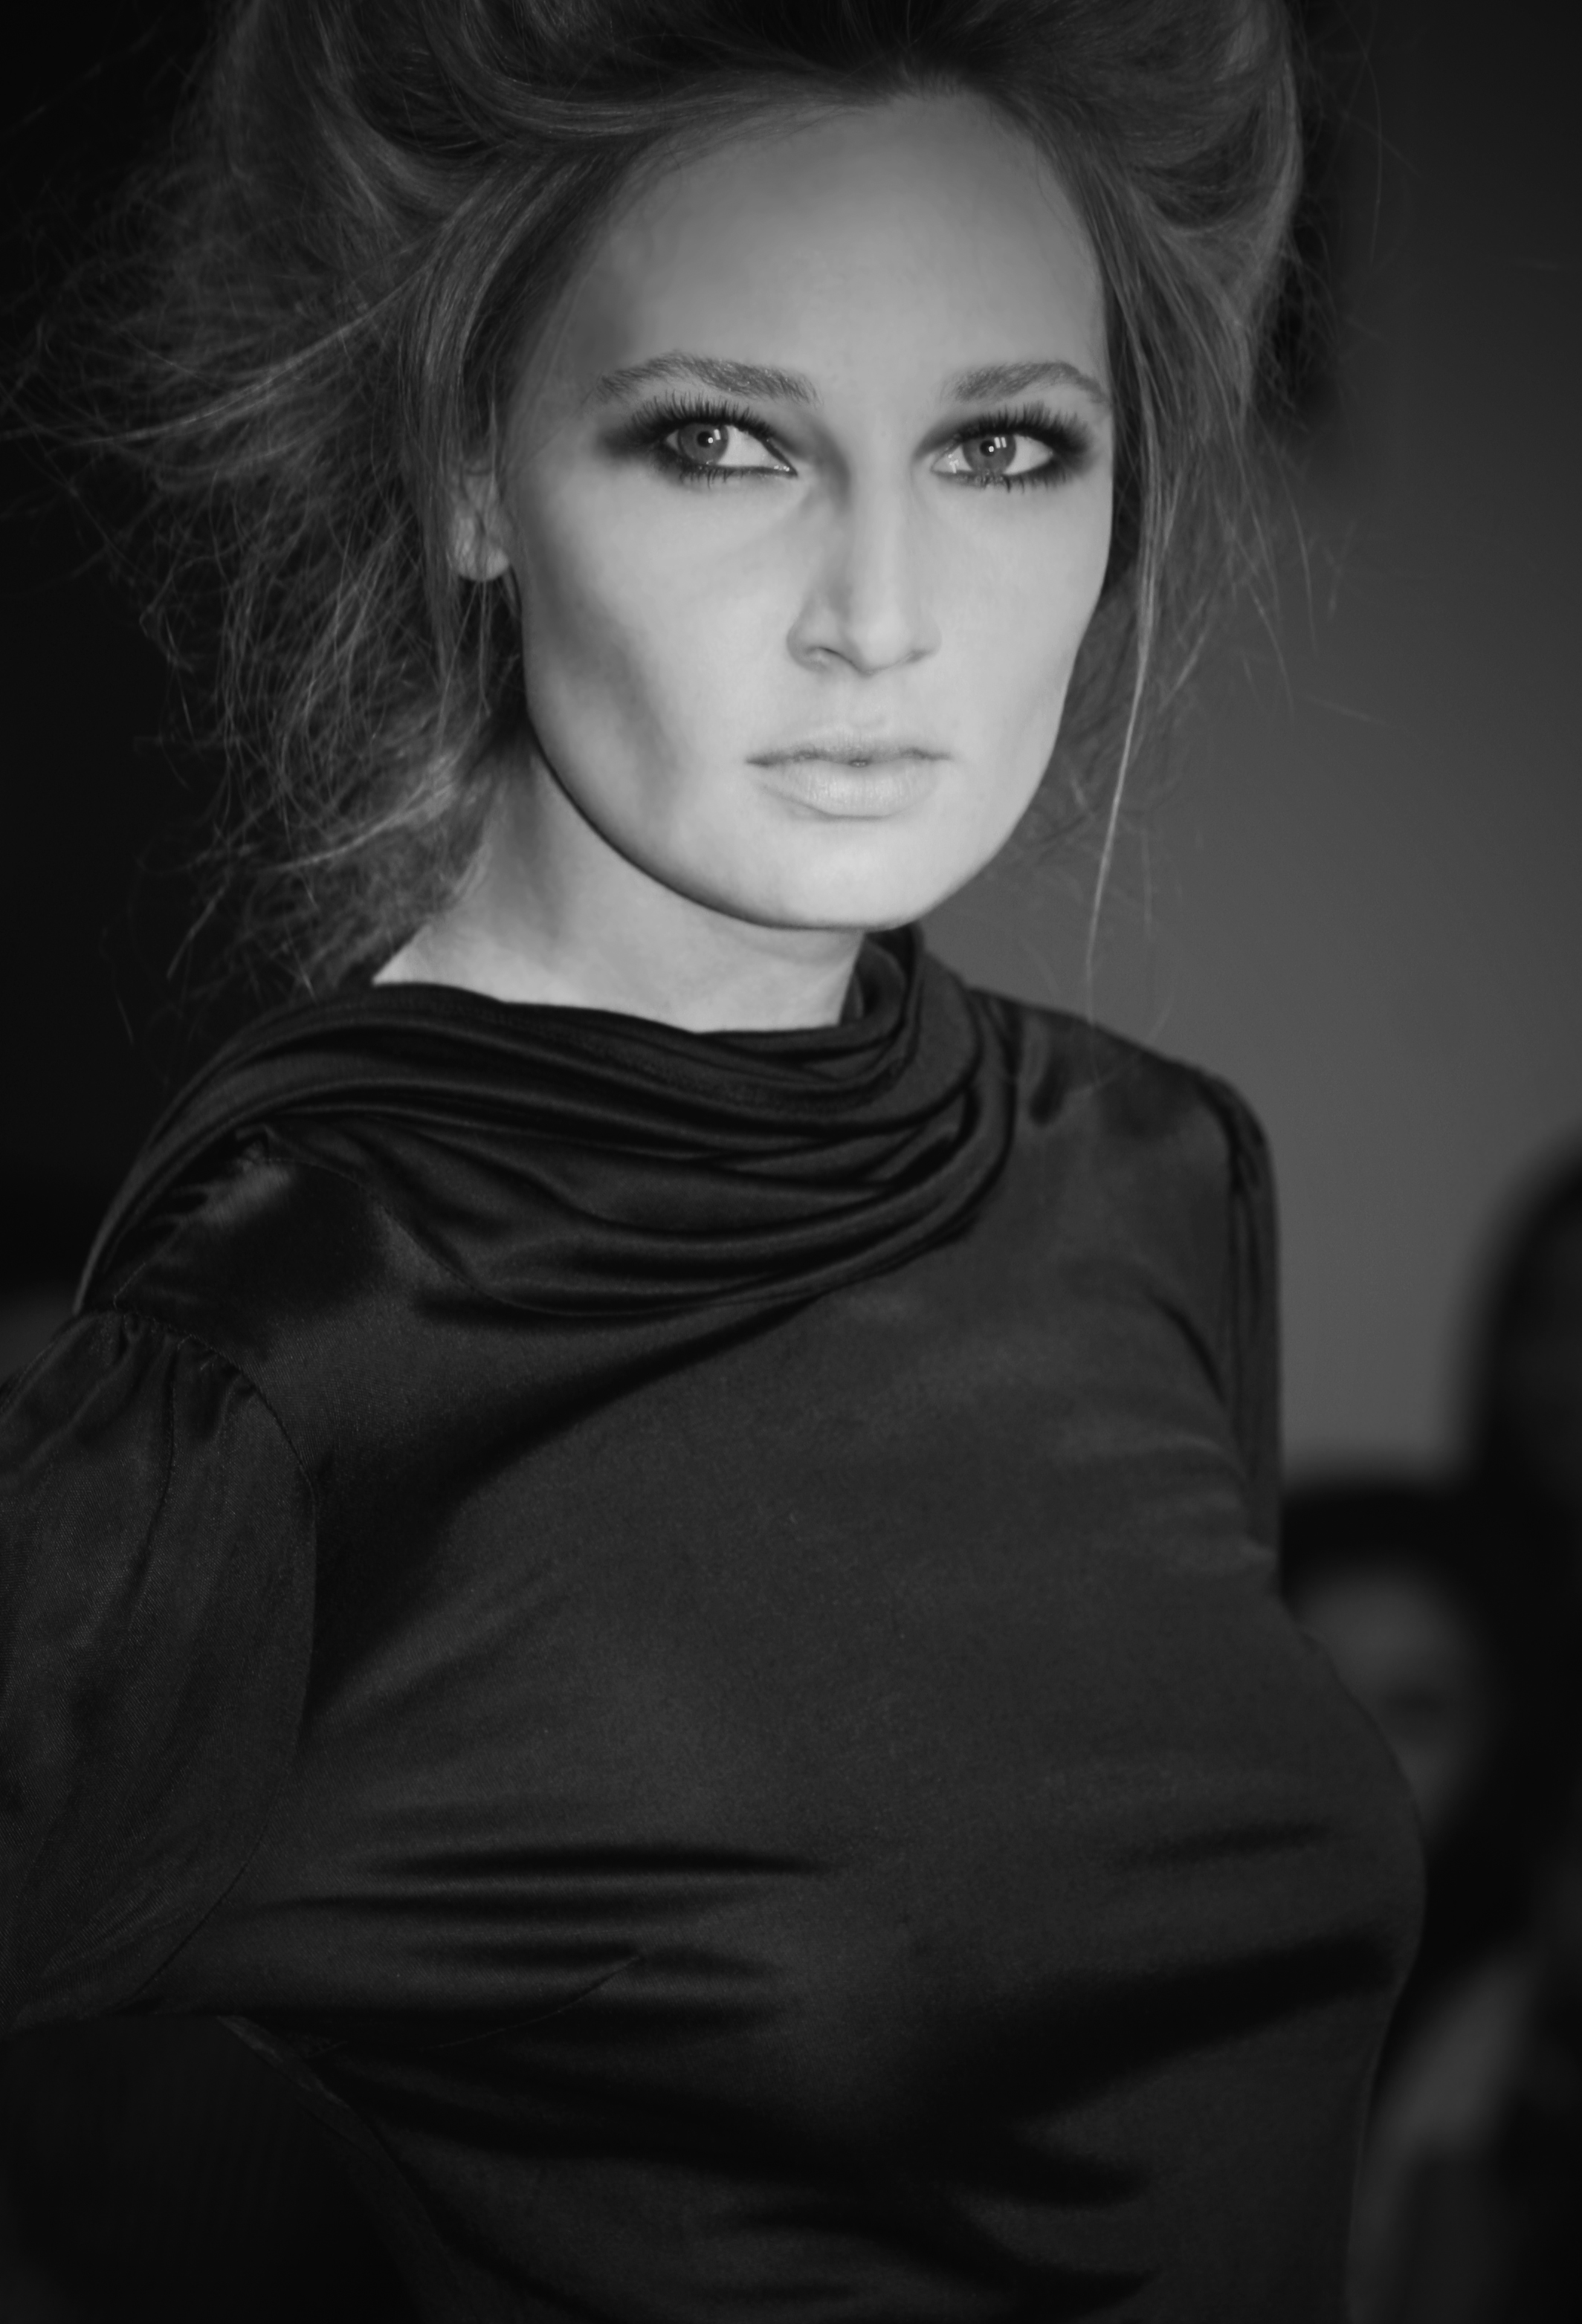 Fashion Model in Black and White